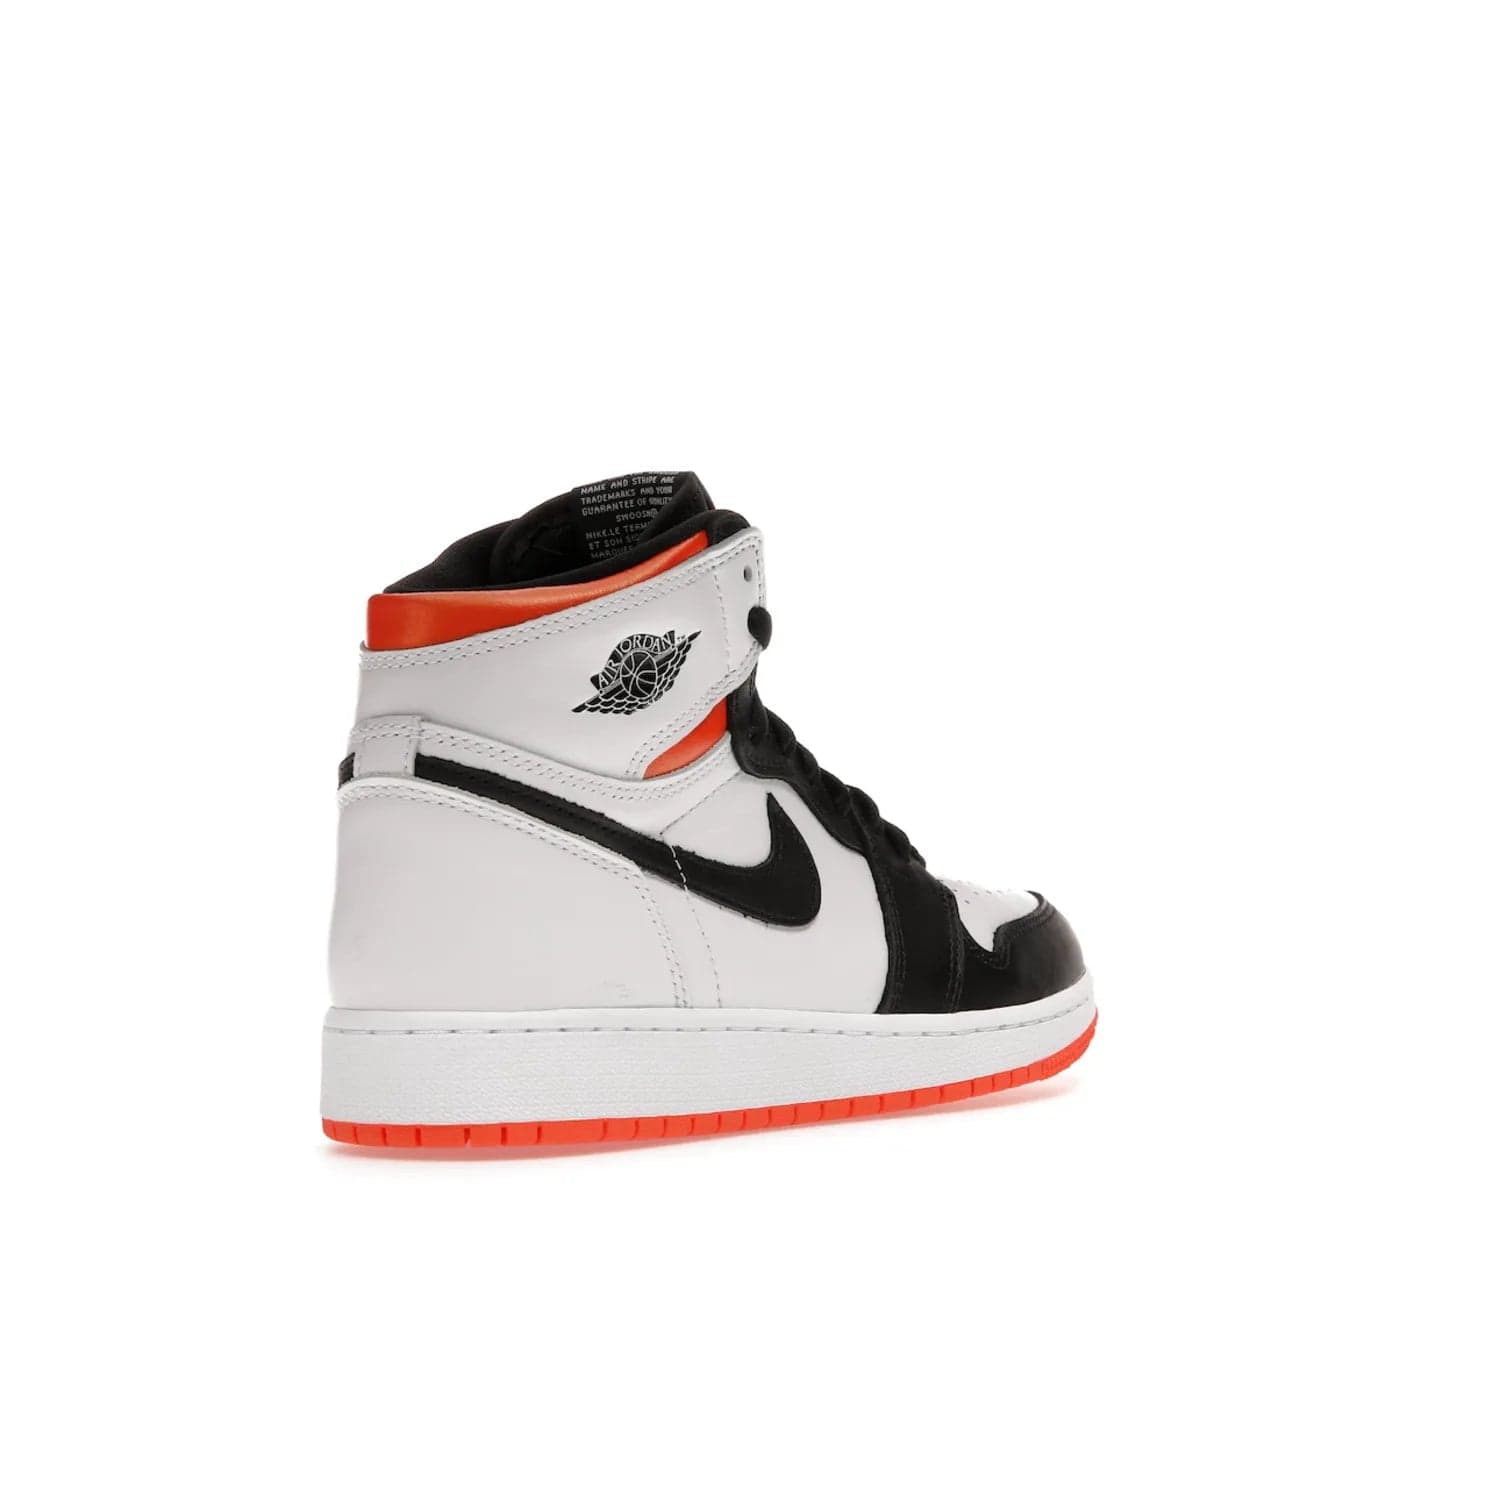 Jordan 1 High OG Electro Orange (GS) - Image 32 - Only at www.BallersClubKickz.com - The Air Jordan 1 High OG Electro Orange GS is the ideal shoe for kids on the go. Featuring white leather uppers, black overlays, and bright orange accents, it's sure to become a favorite. A great mix of classic style and vibrant colors, the shoe delivers air cushioning for comfort and hard orange rubber for grip. Release on July 17th, 2021. Get them a pair today.